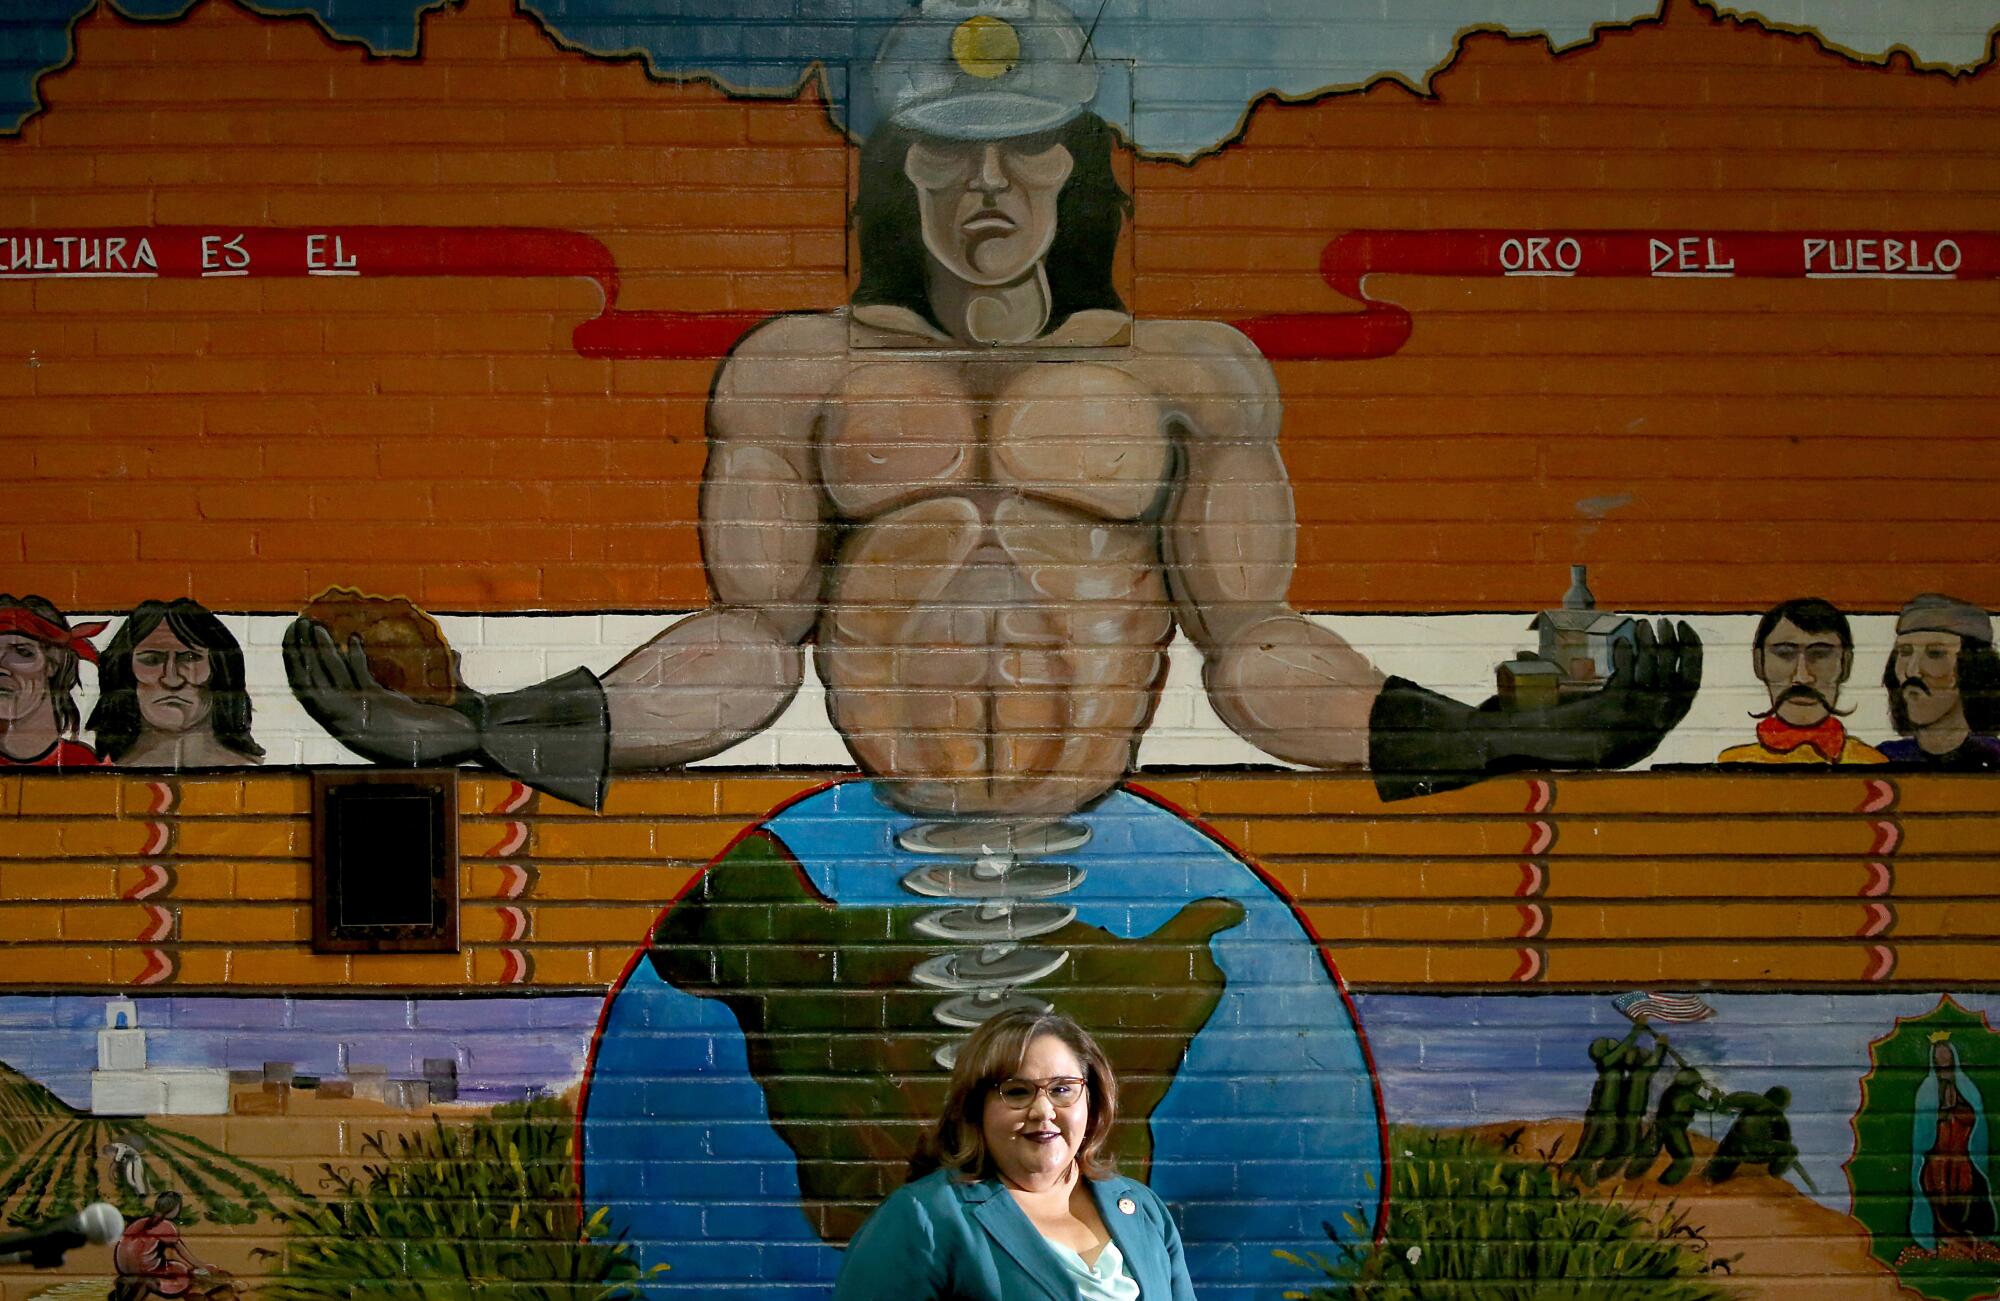 A woman stands in front of a mural